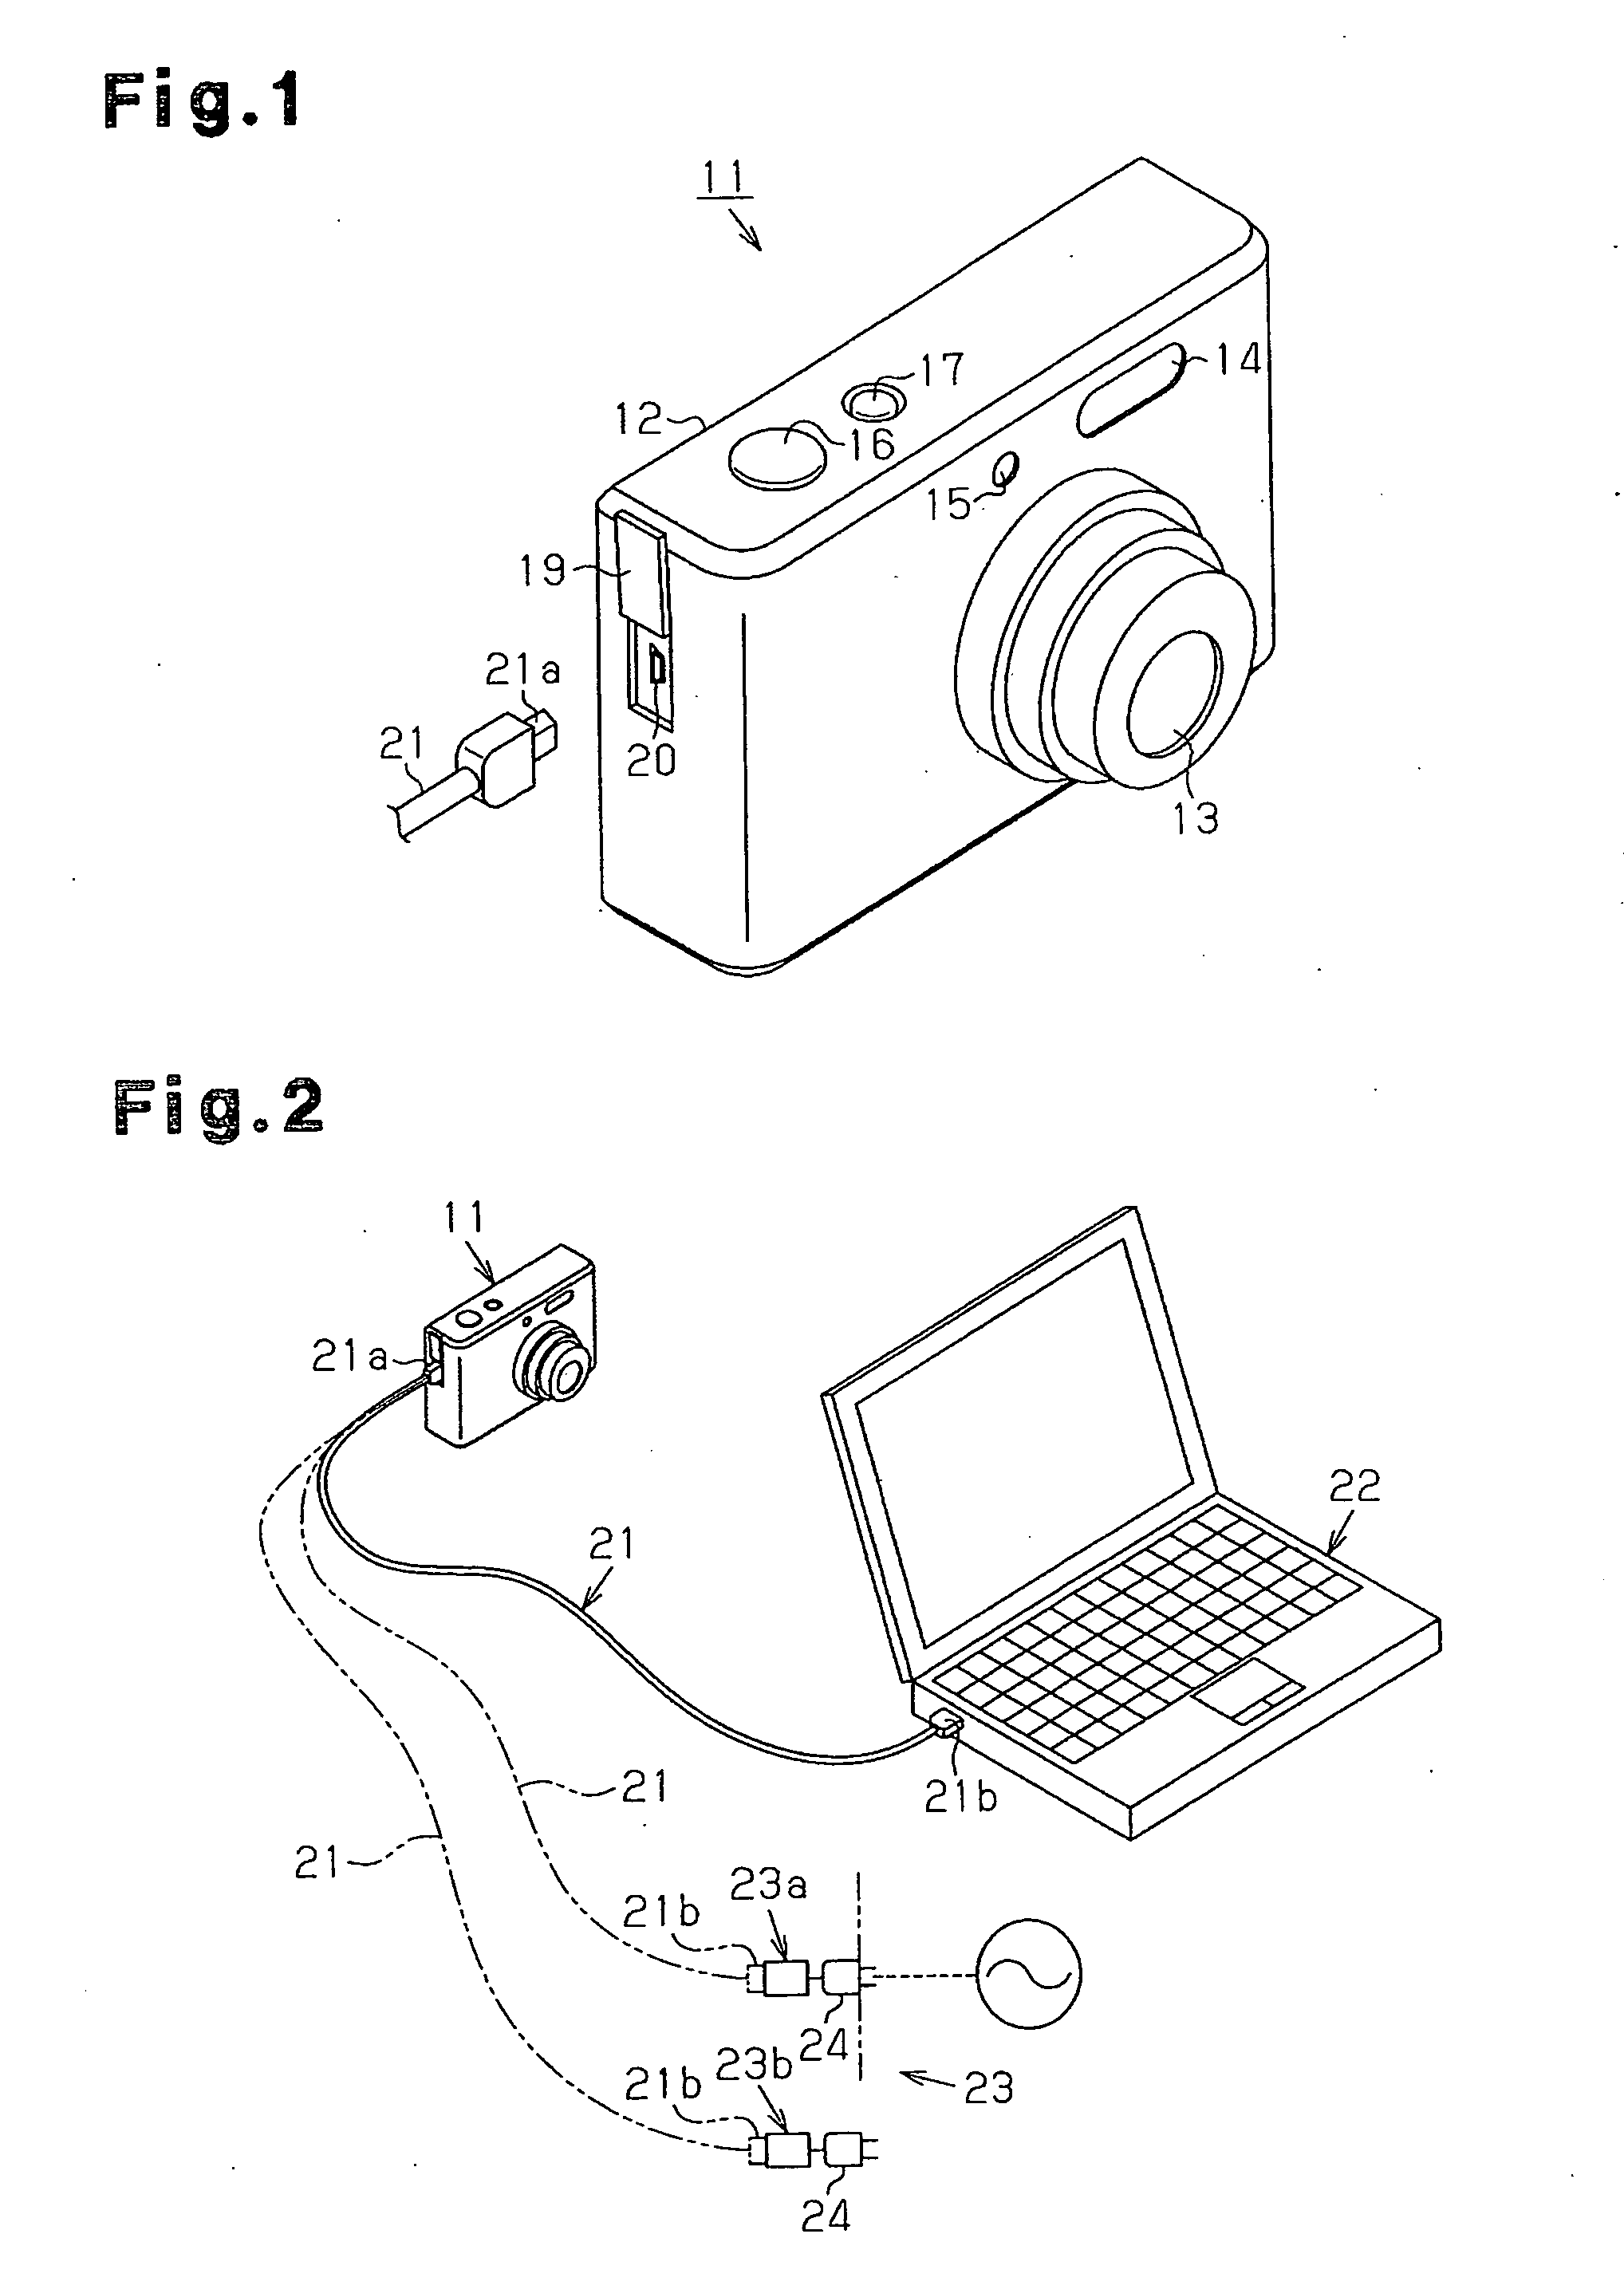 Charger for electronic device, electronic device, and charging method